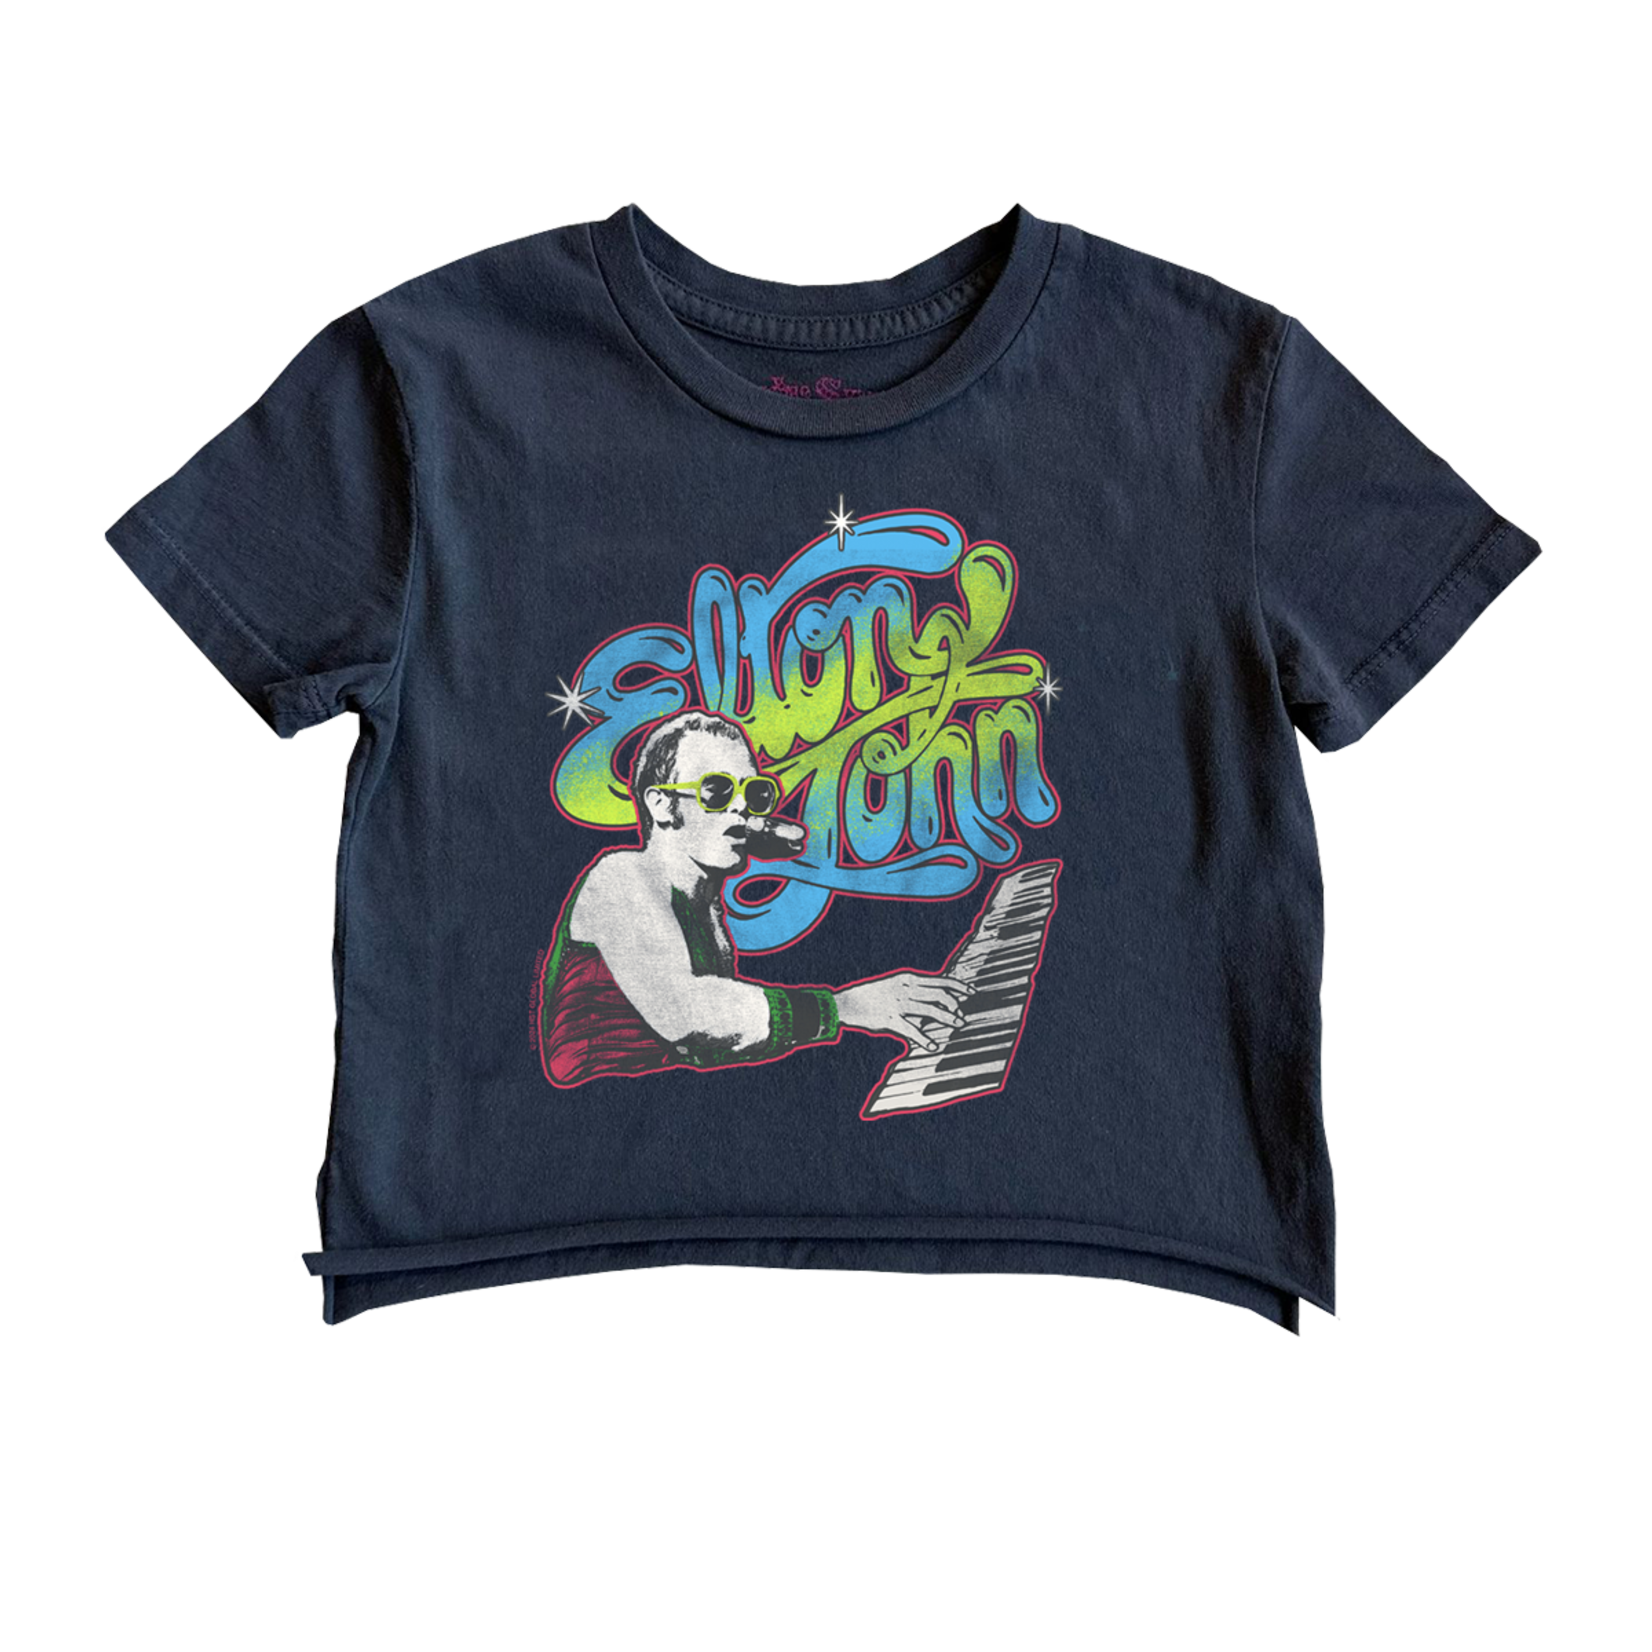 Rowdy Sprout Rowdy Sprout Jet Black Elton John Not Quite Crop Top Tee